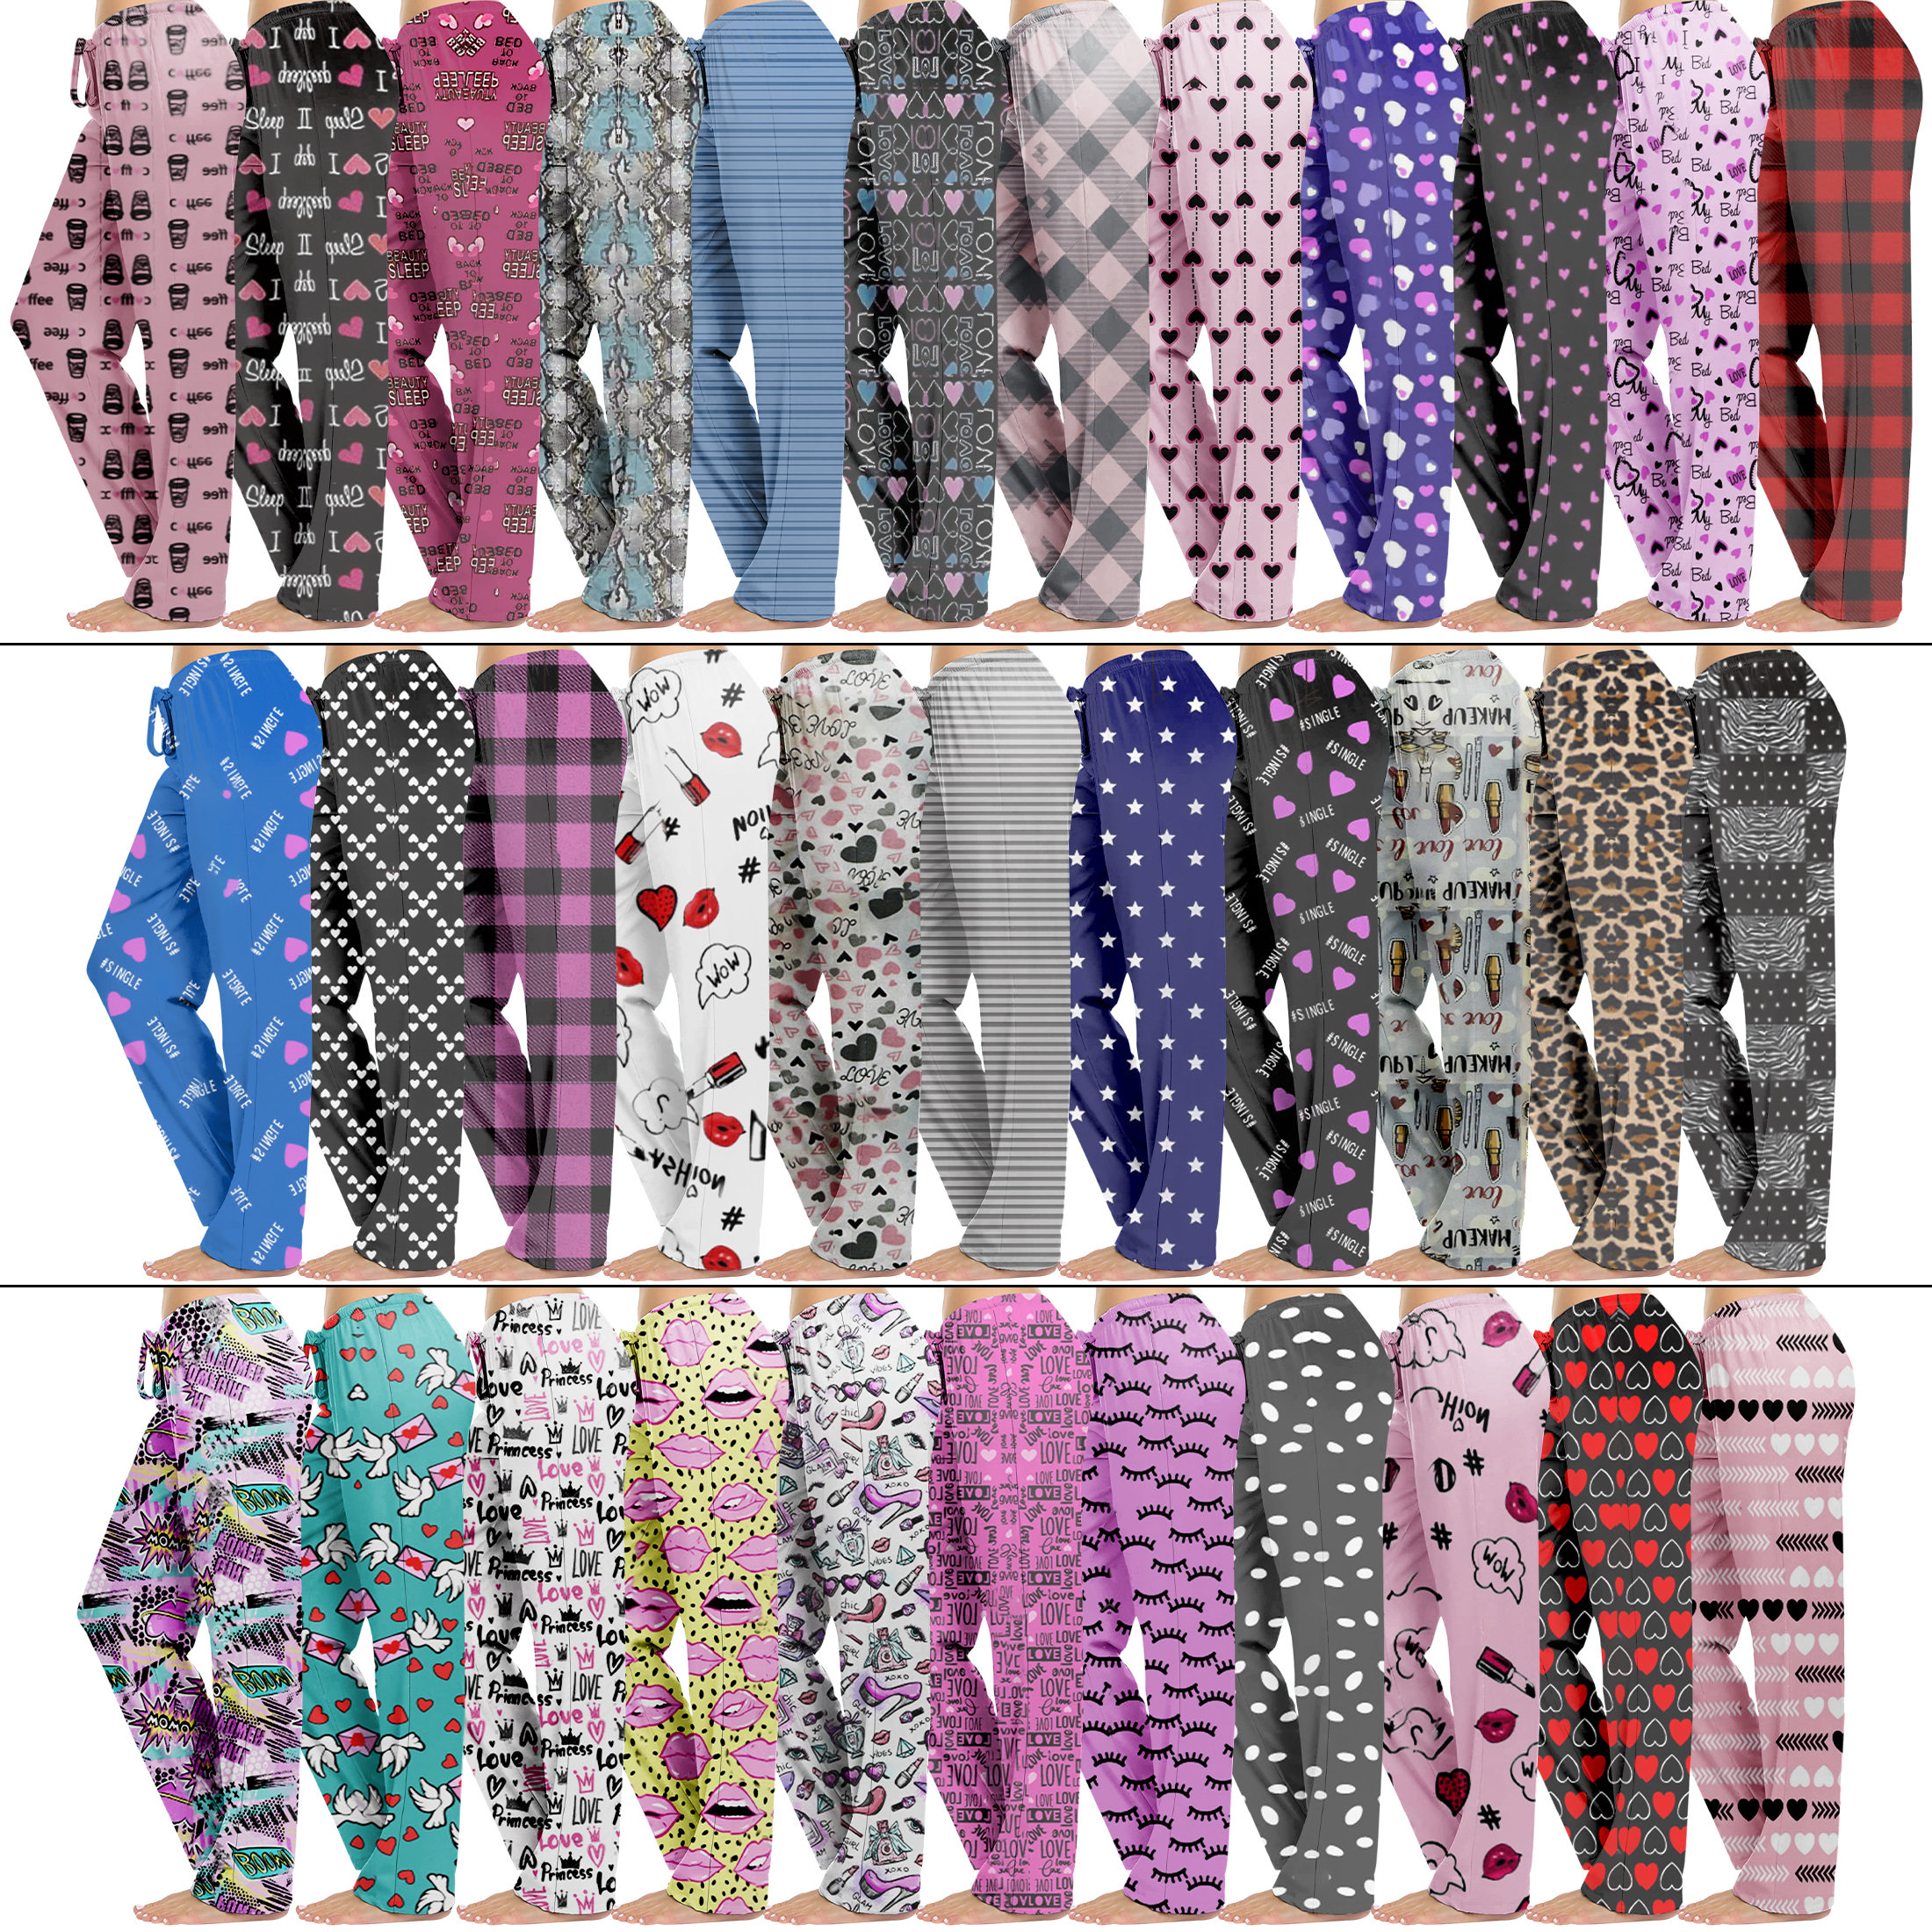 Multi-Pack: Women's Comfy Printed Lounge Pajama Pants For Sleepwear - 3 Pack, Small